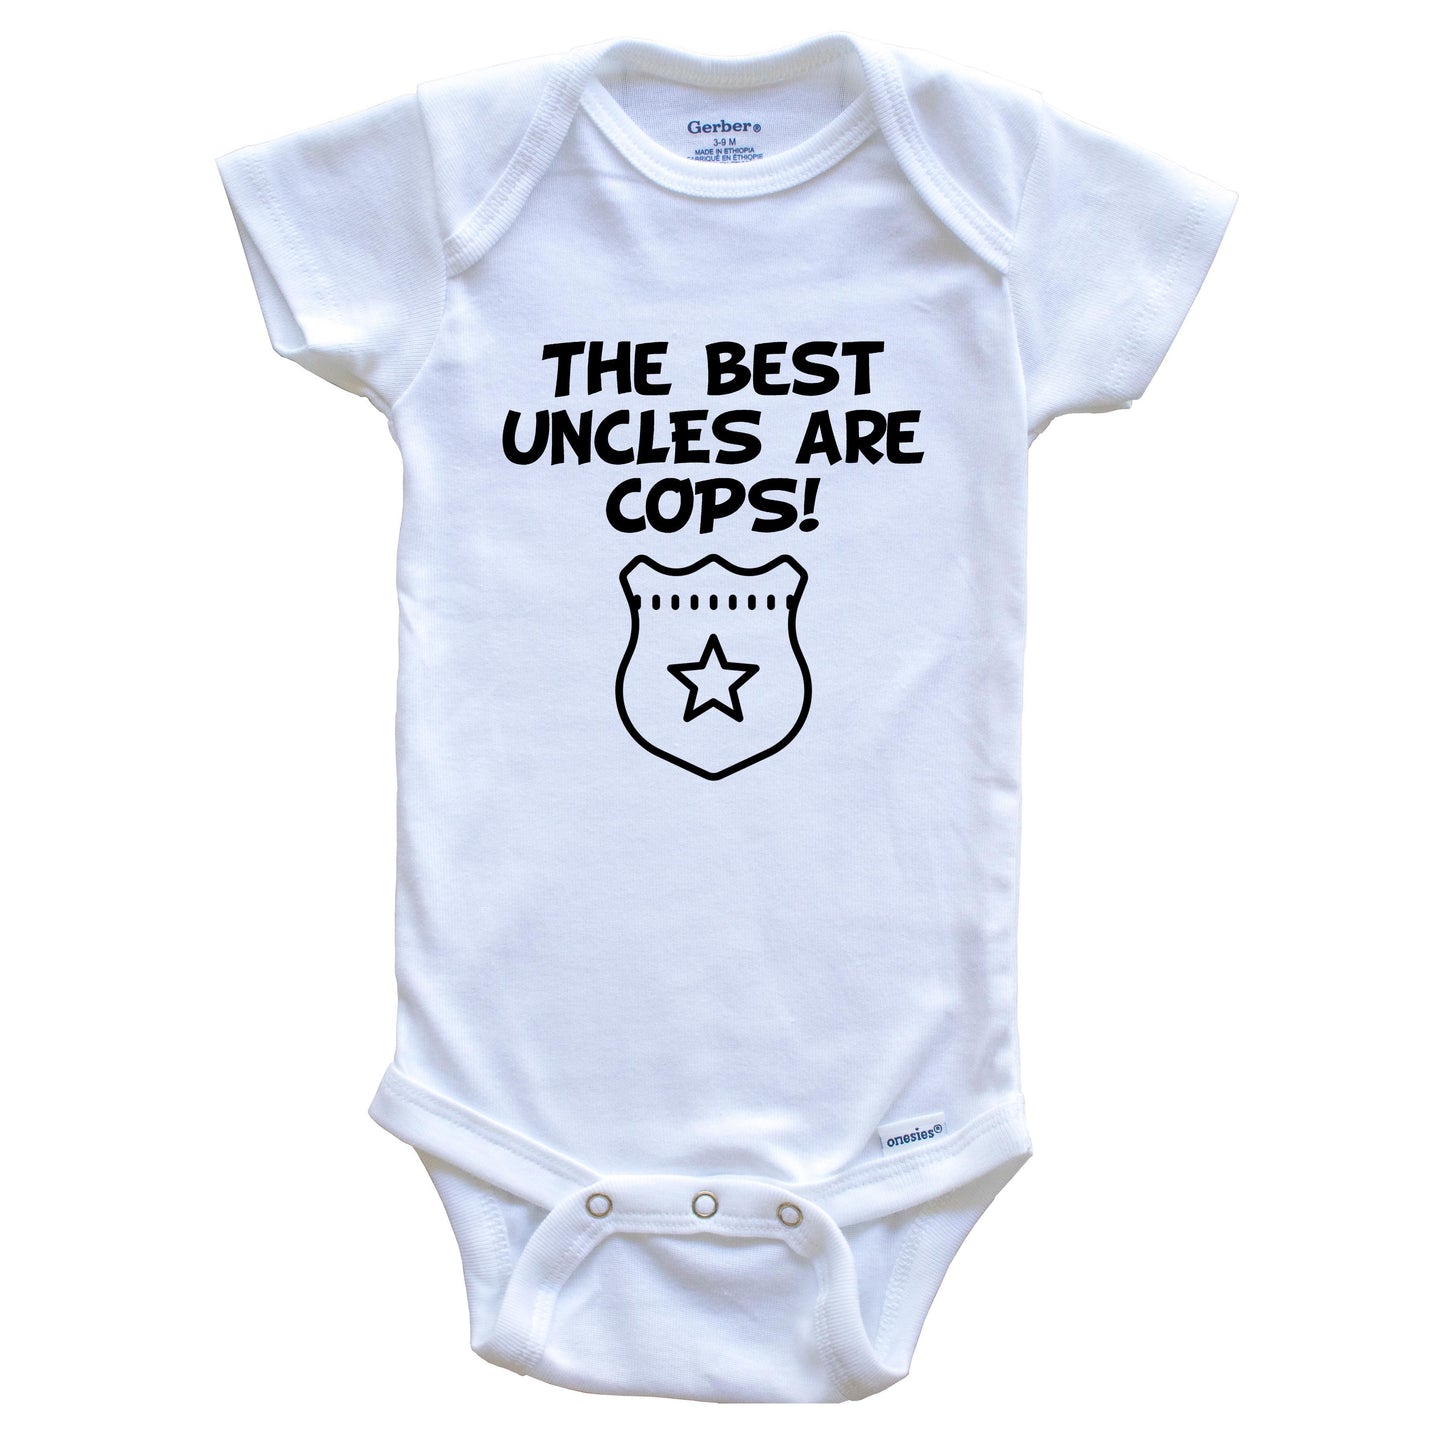 The Best Uncles Are Cops Funny Niece Nephew Baby Onesie